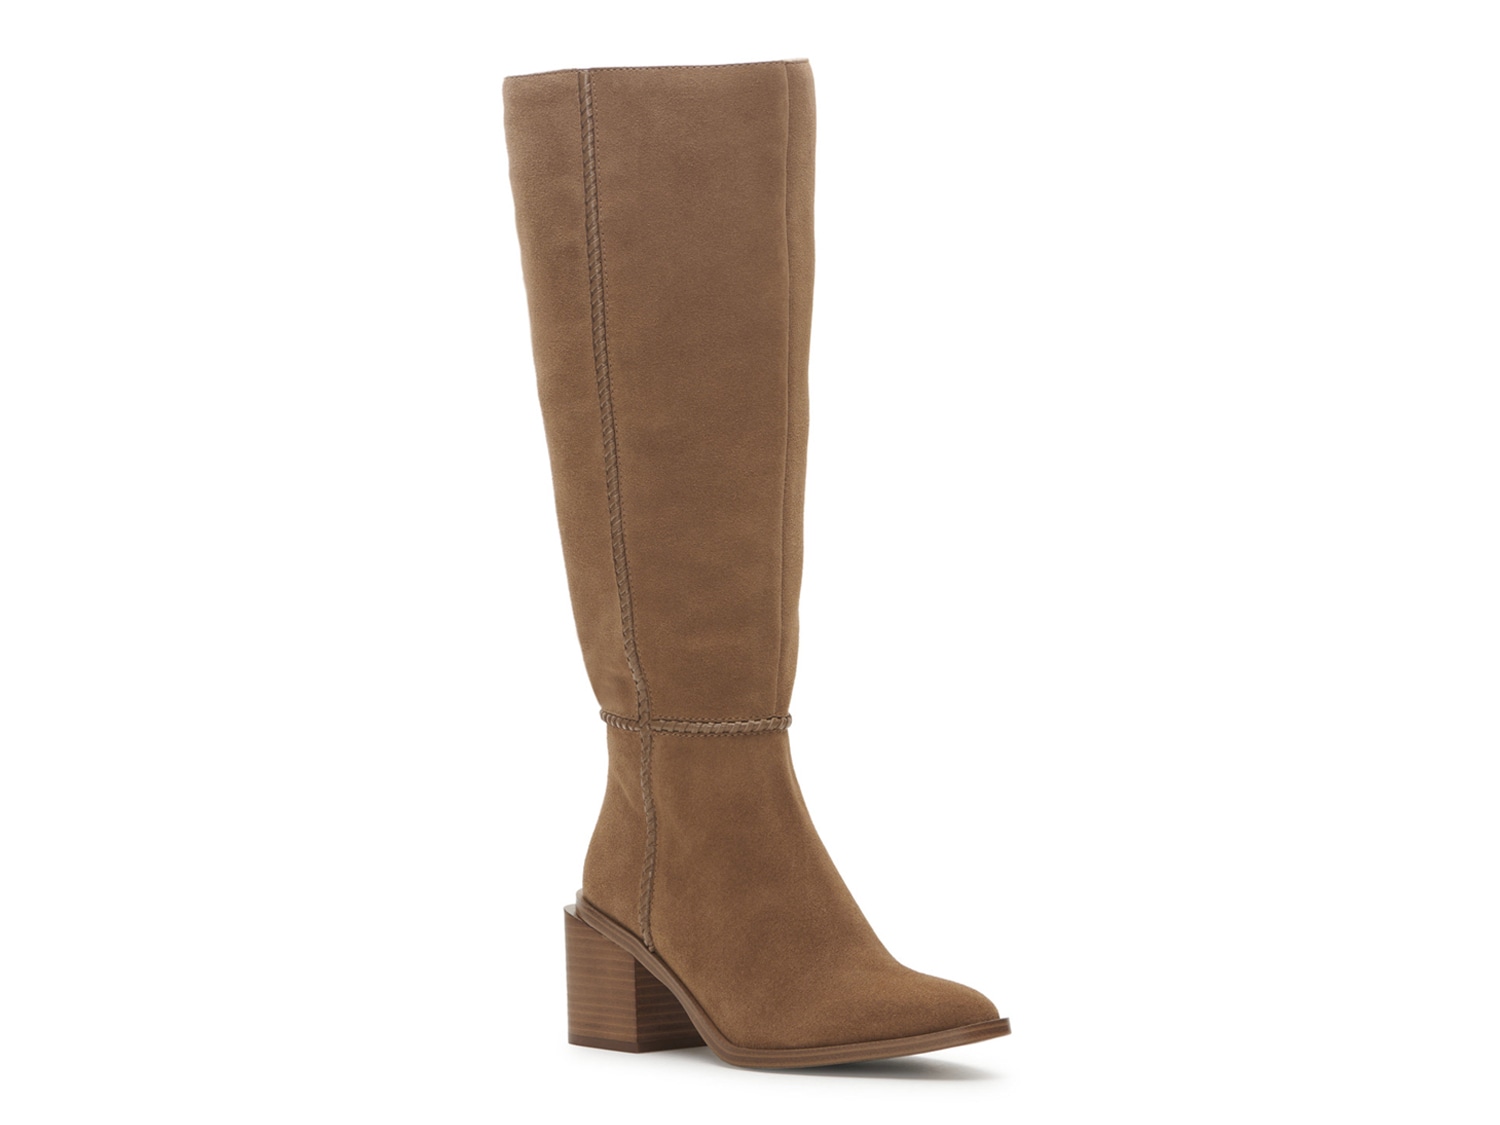 Vince Camuto Kaleeca Wide Calf Boot - Free Shipping | DSW